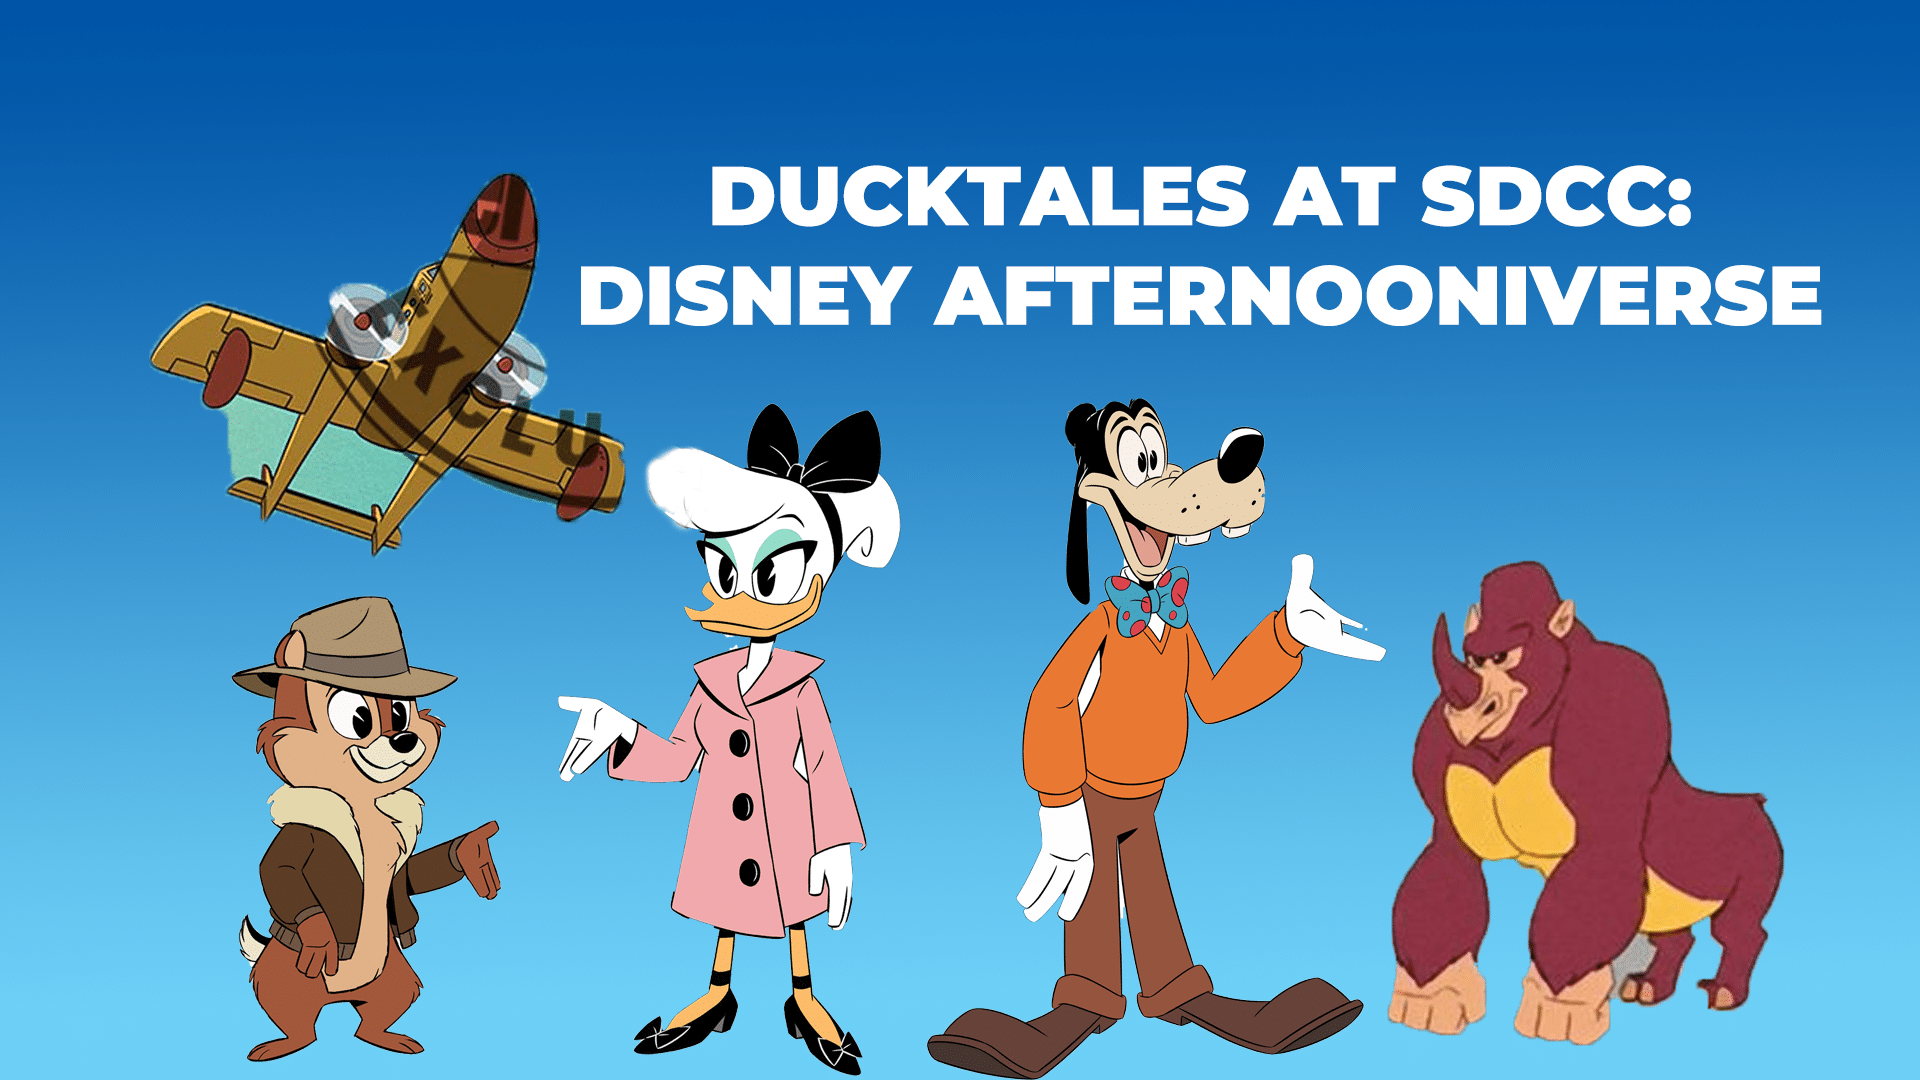 Disney’s DuckTales Has Just Blown Away SDCC With the Disney Afternoon Cinematic Universe